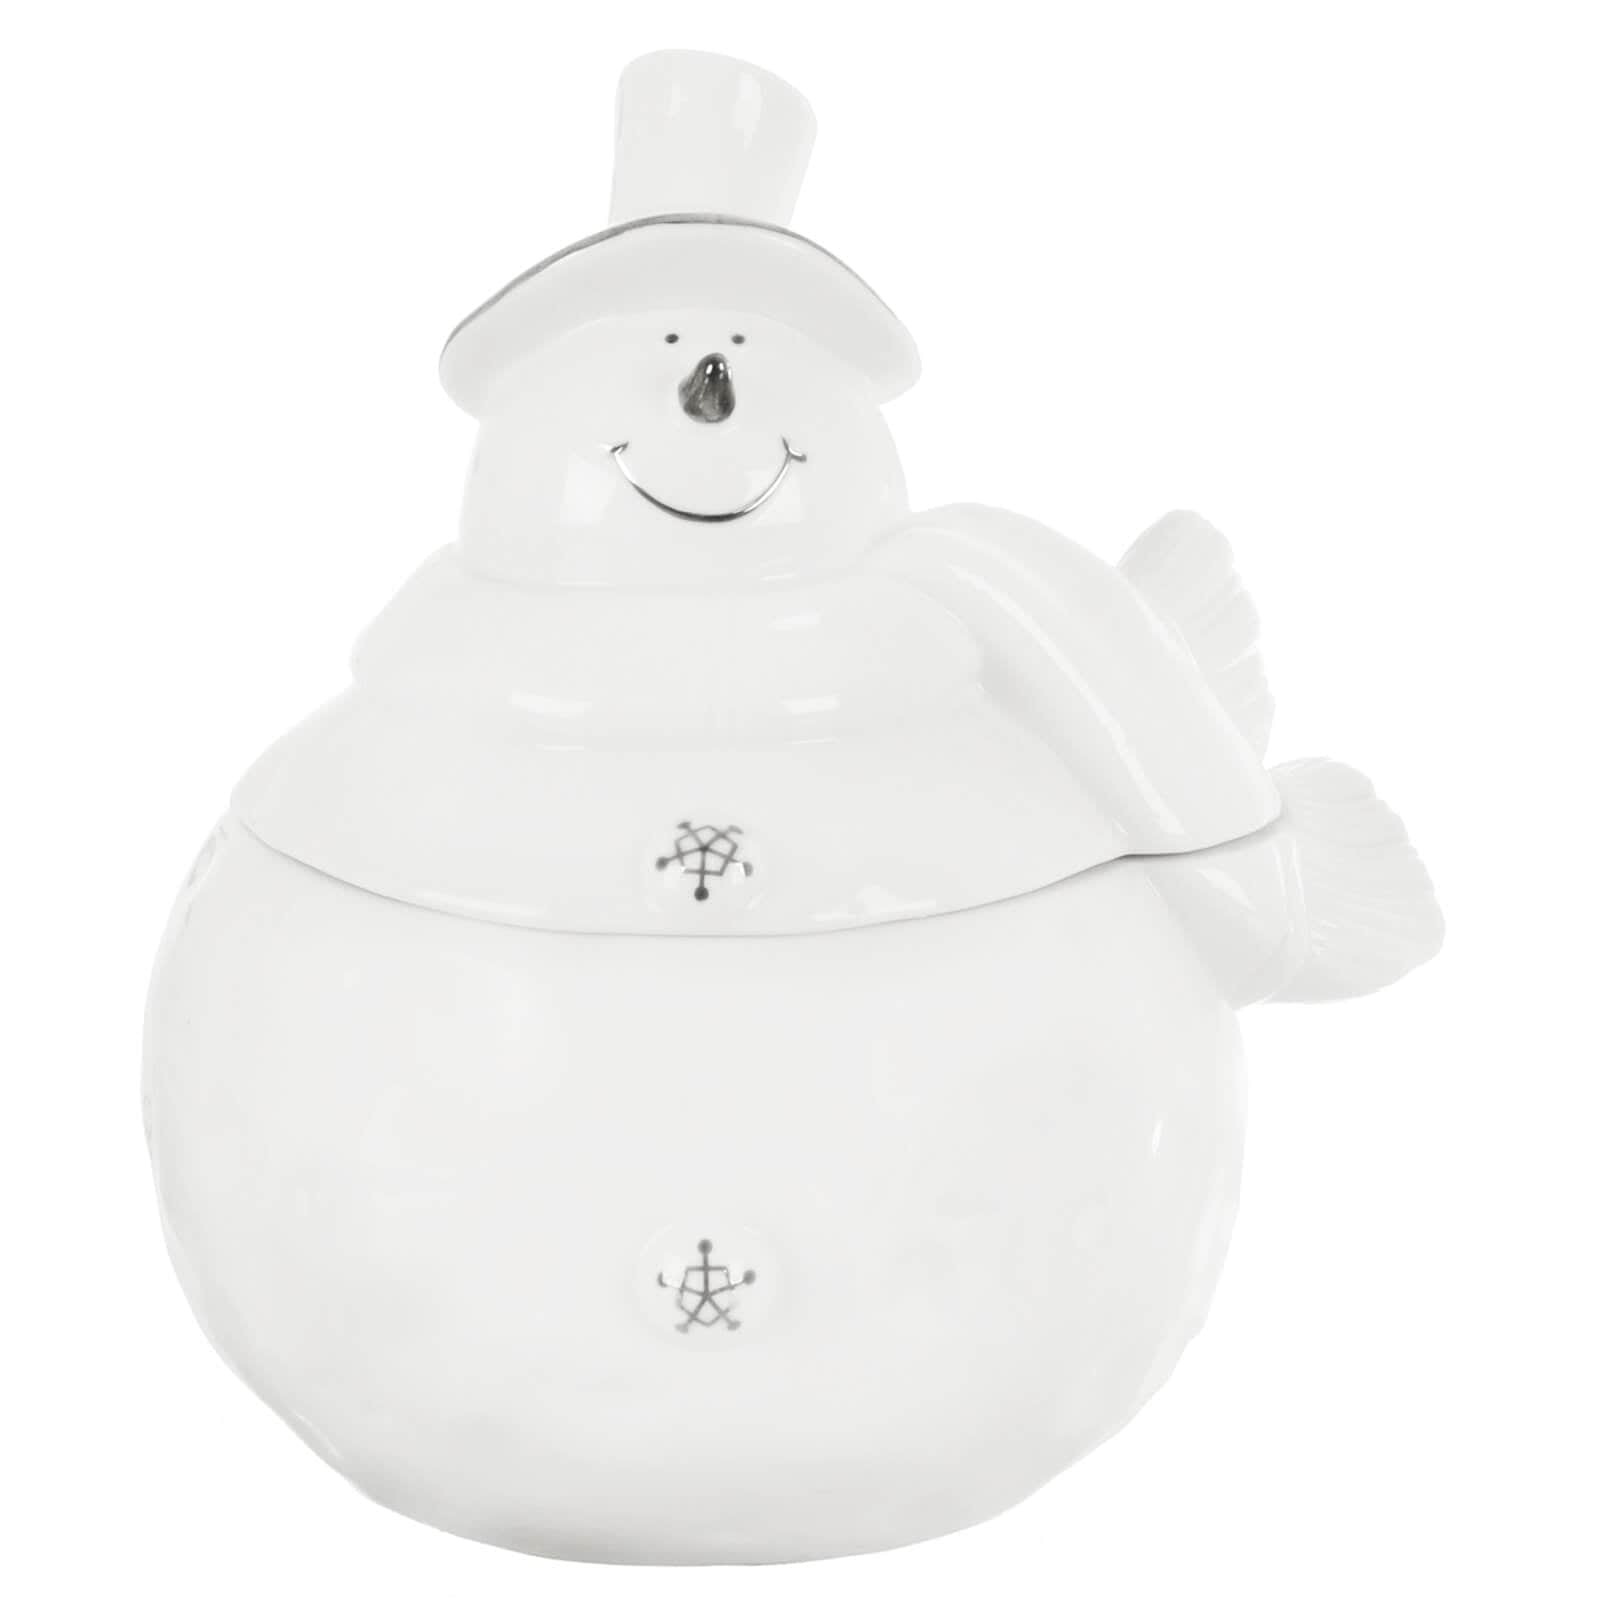 White Snowman Christmas storage jar, candy or cookie holder with silver detailing